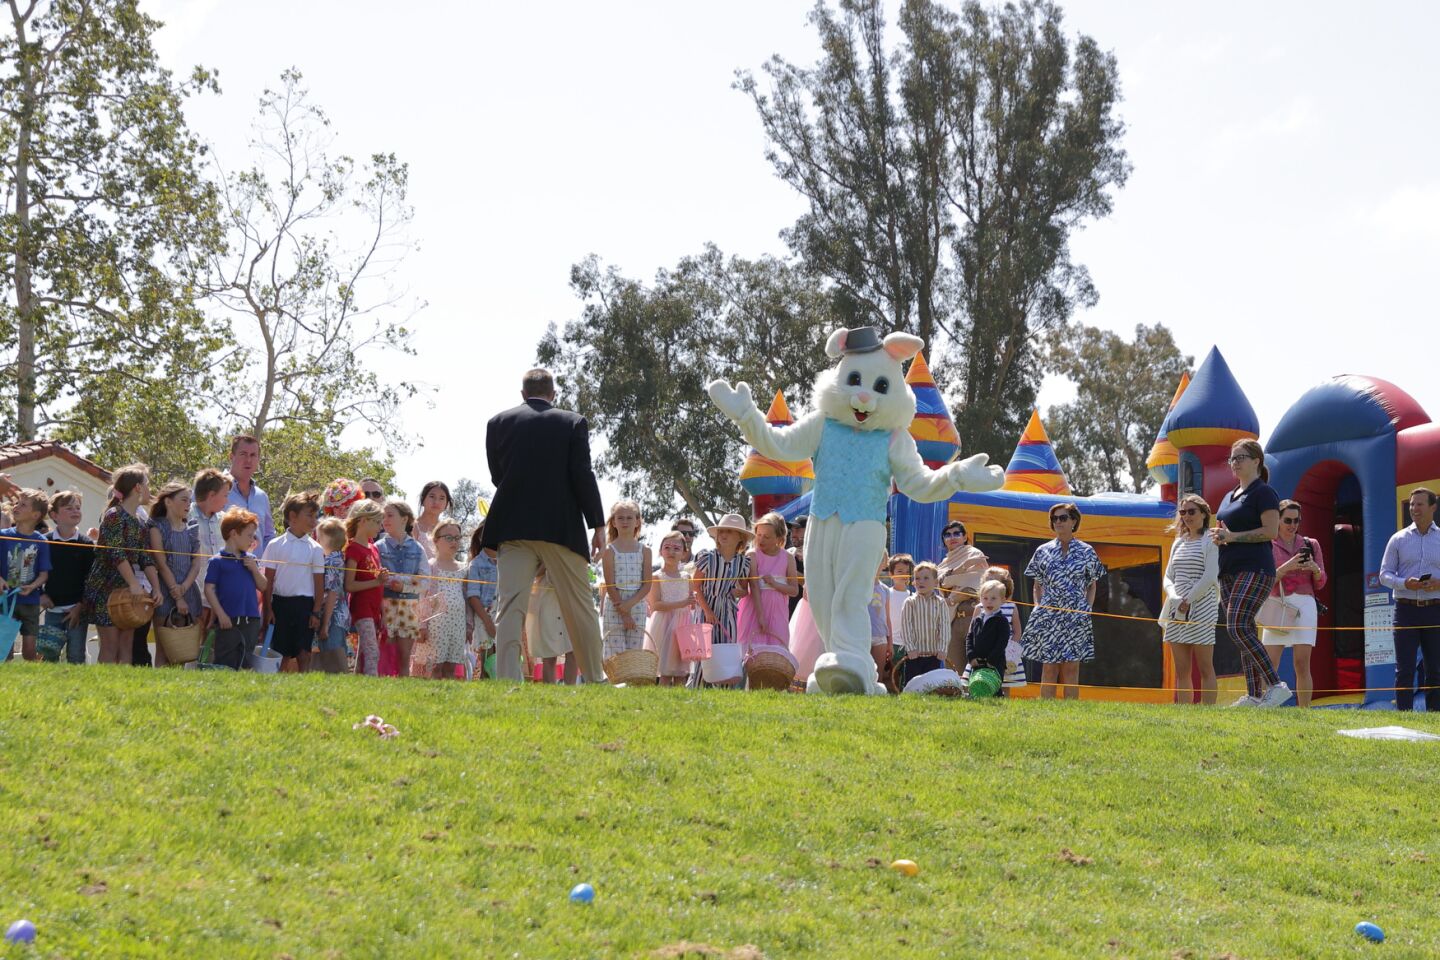 The Easter Bunny does a final check of the eggs to be sure they are ready for the Easter Egg Hunt at the RSF Golf Club